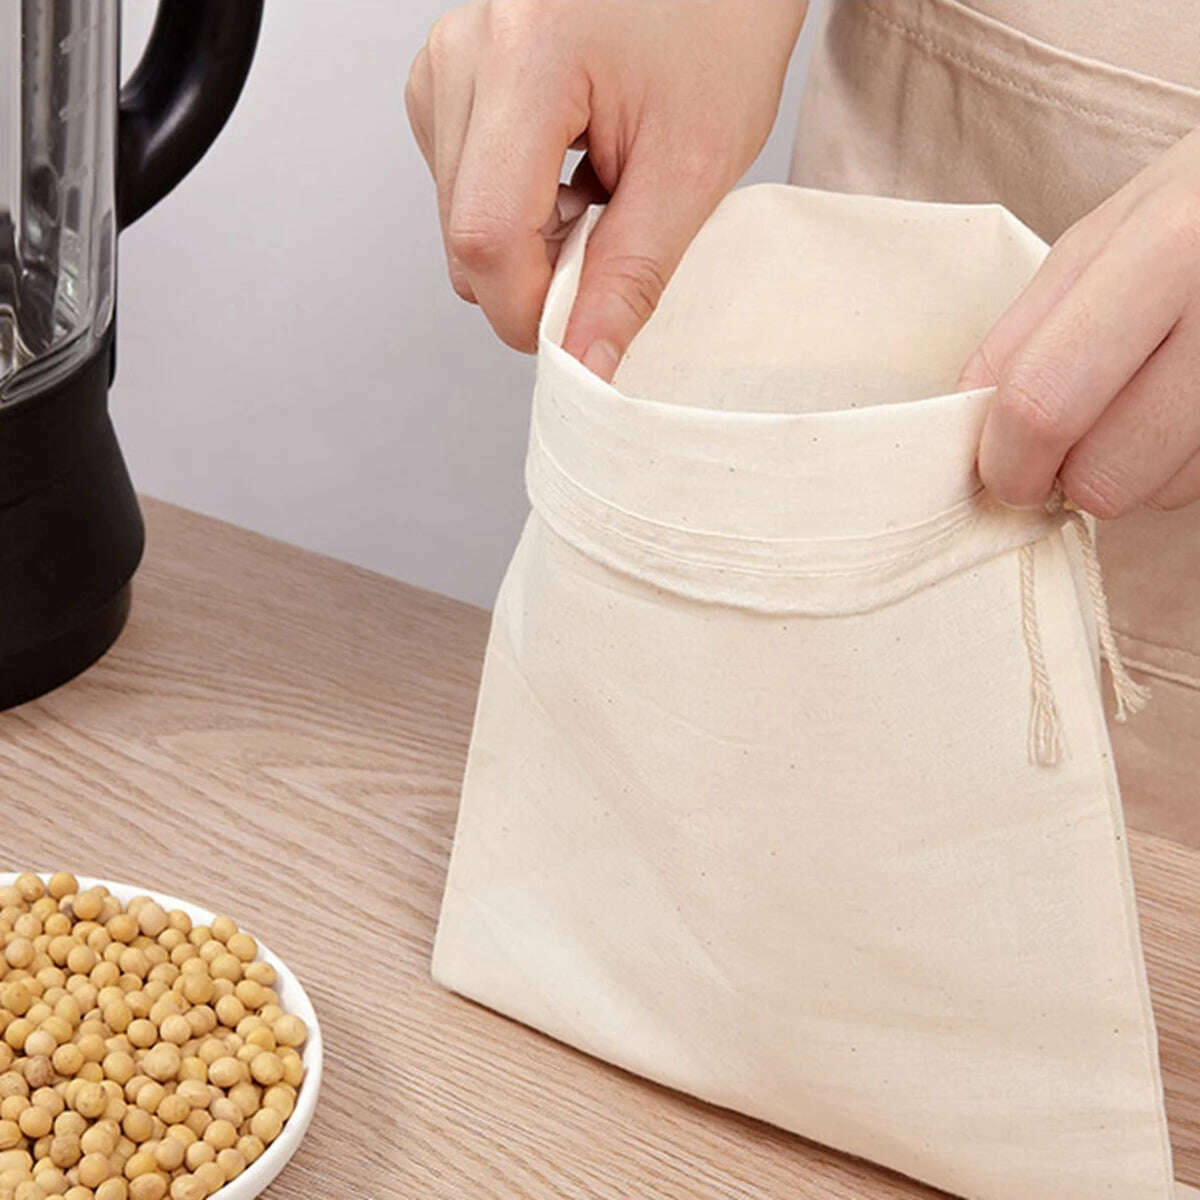 KIMLUD, Reusable Nut Milk Bags Strainers Unbleached Natural Cotton Cheesecloth Bag Food Cheese Yogurt Filter Kitchen Fine Mesh Strainer, KIMLUD Womens Clothes